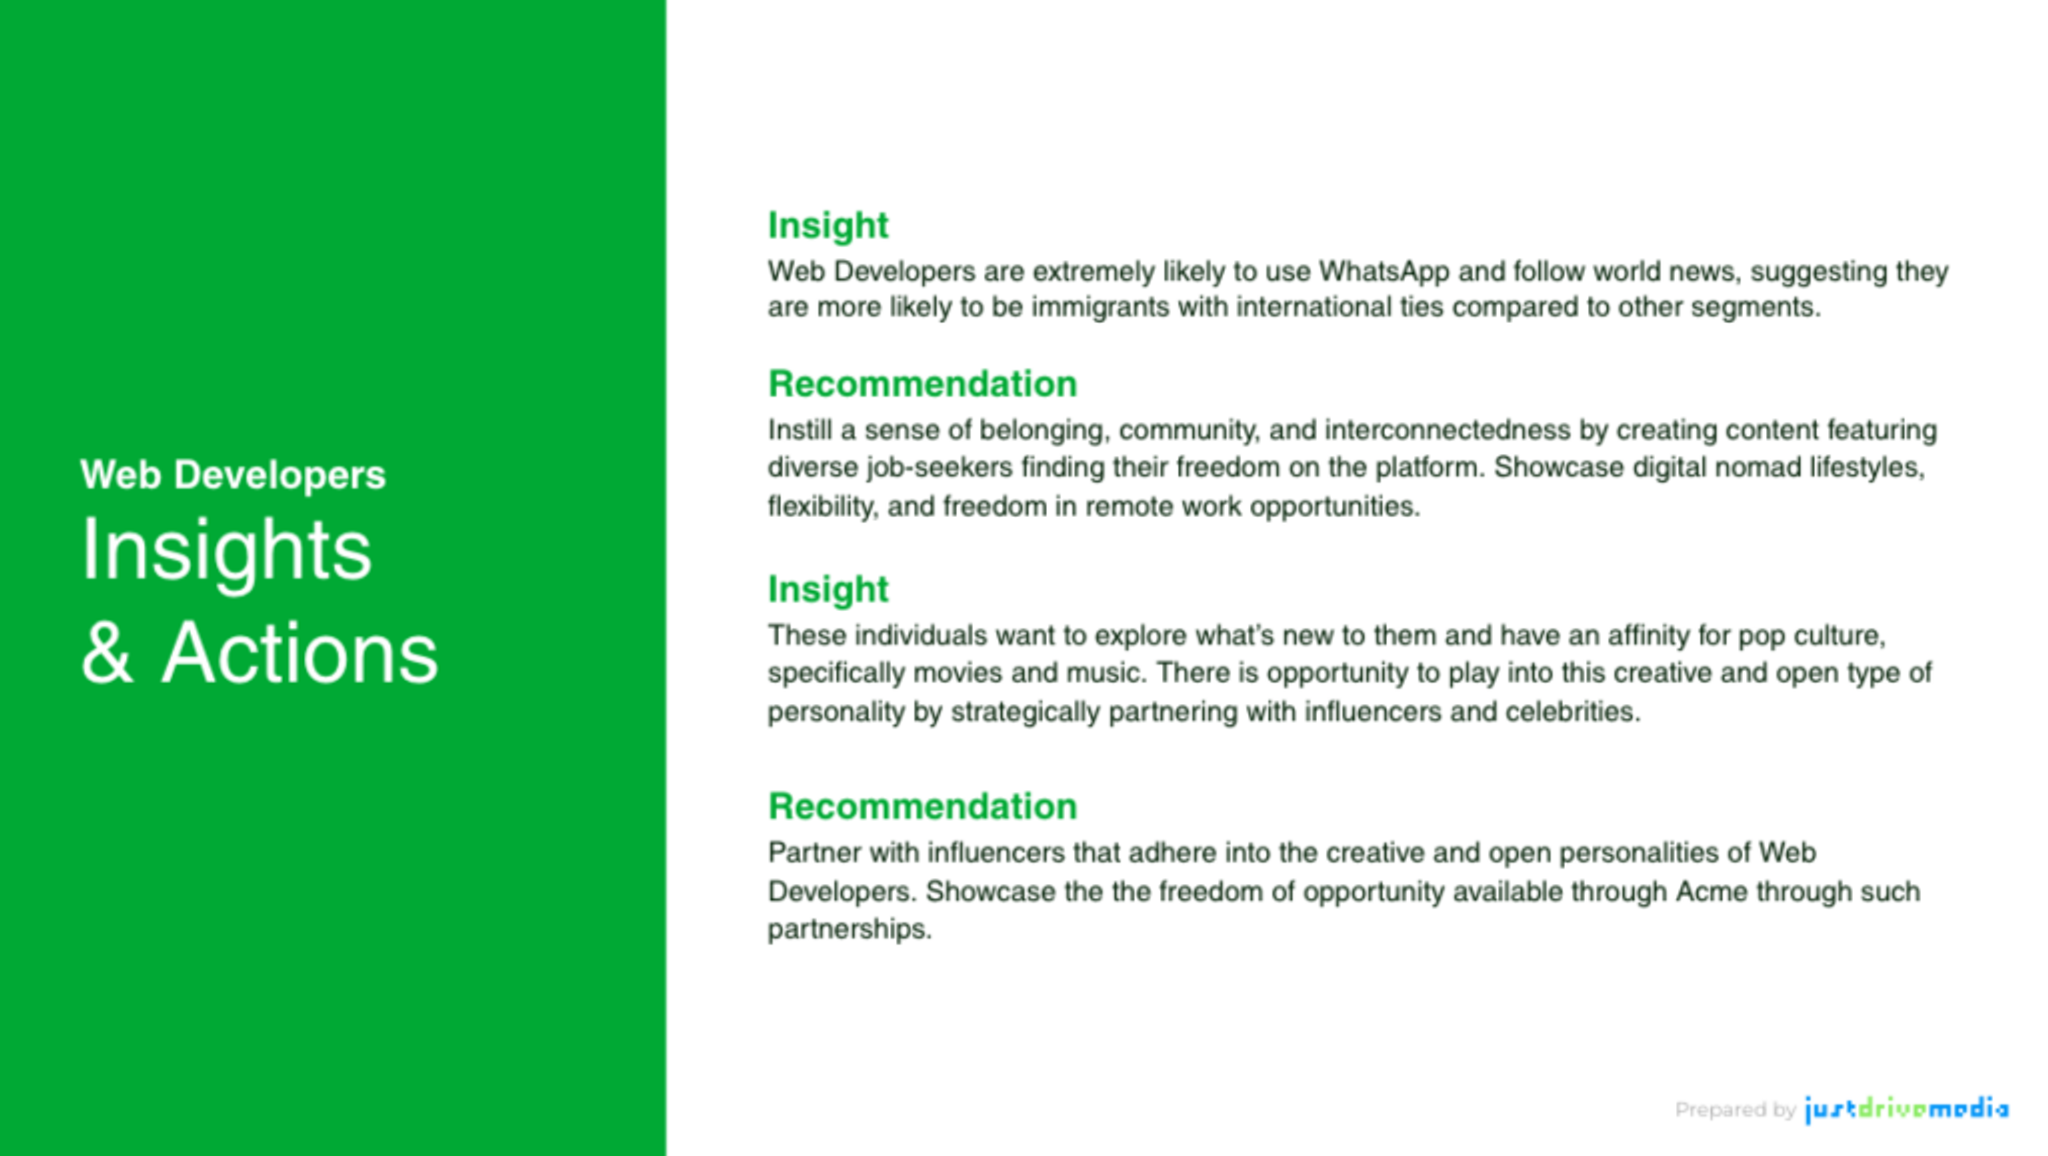 A slide titled "Web Developers Insights & Actions" detailing their preferences and recommending marketing strategies.